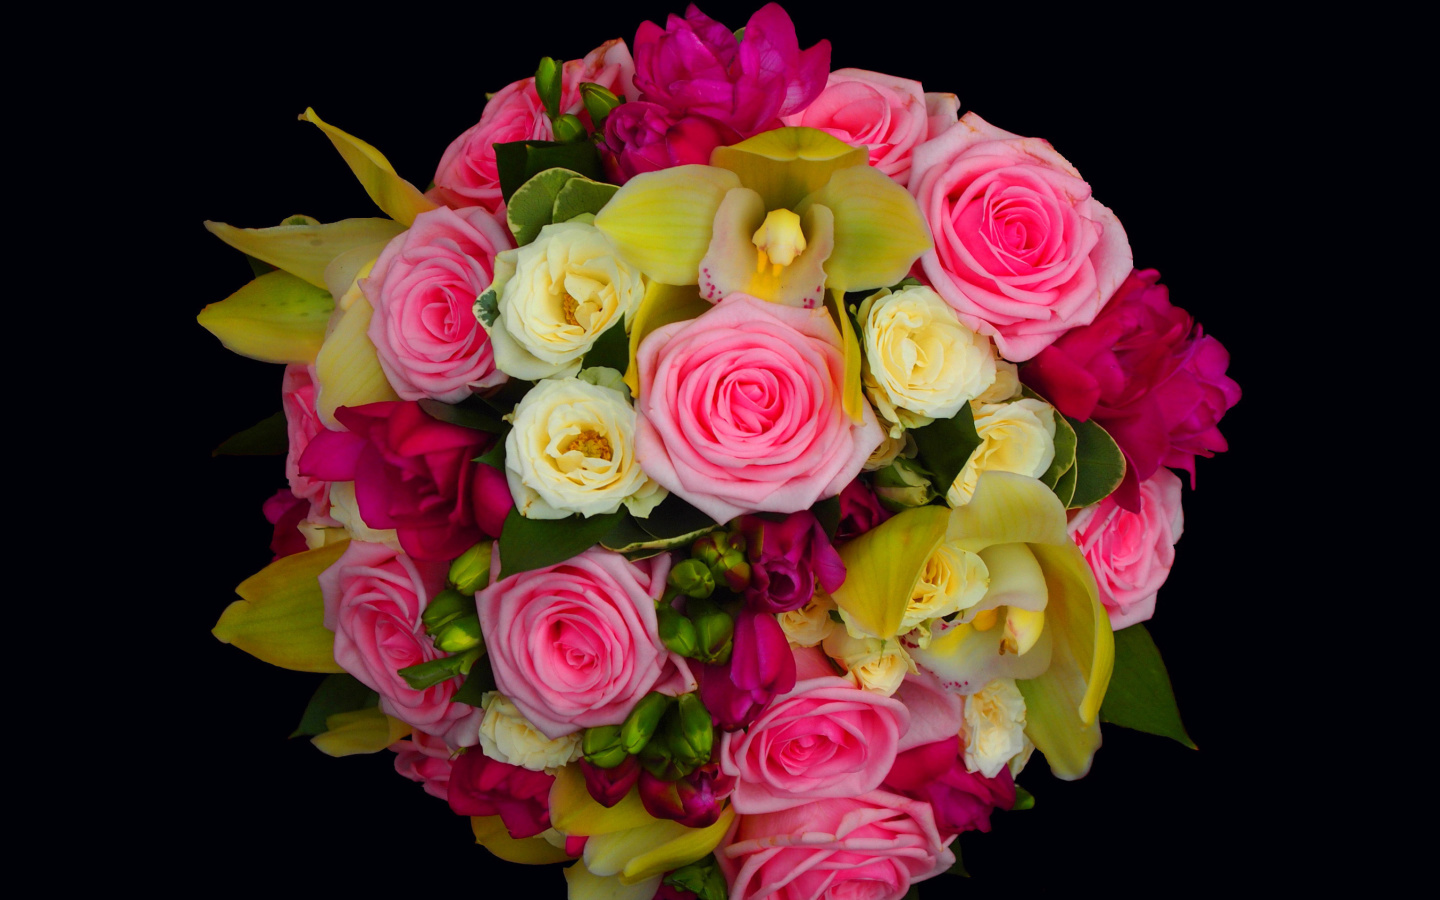 Das Bouquet of roses and yellow orchid, floristry Wallpaper 1440x900